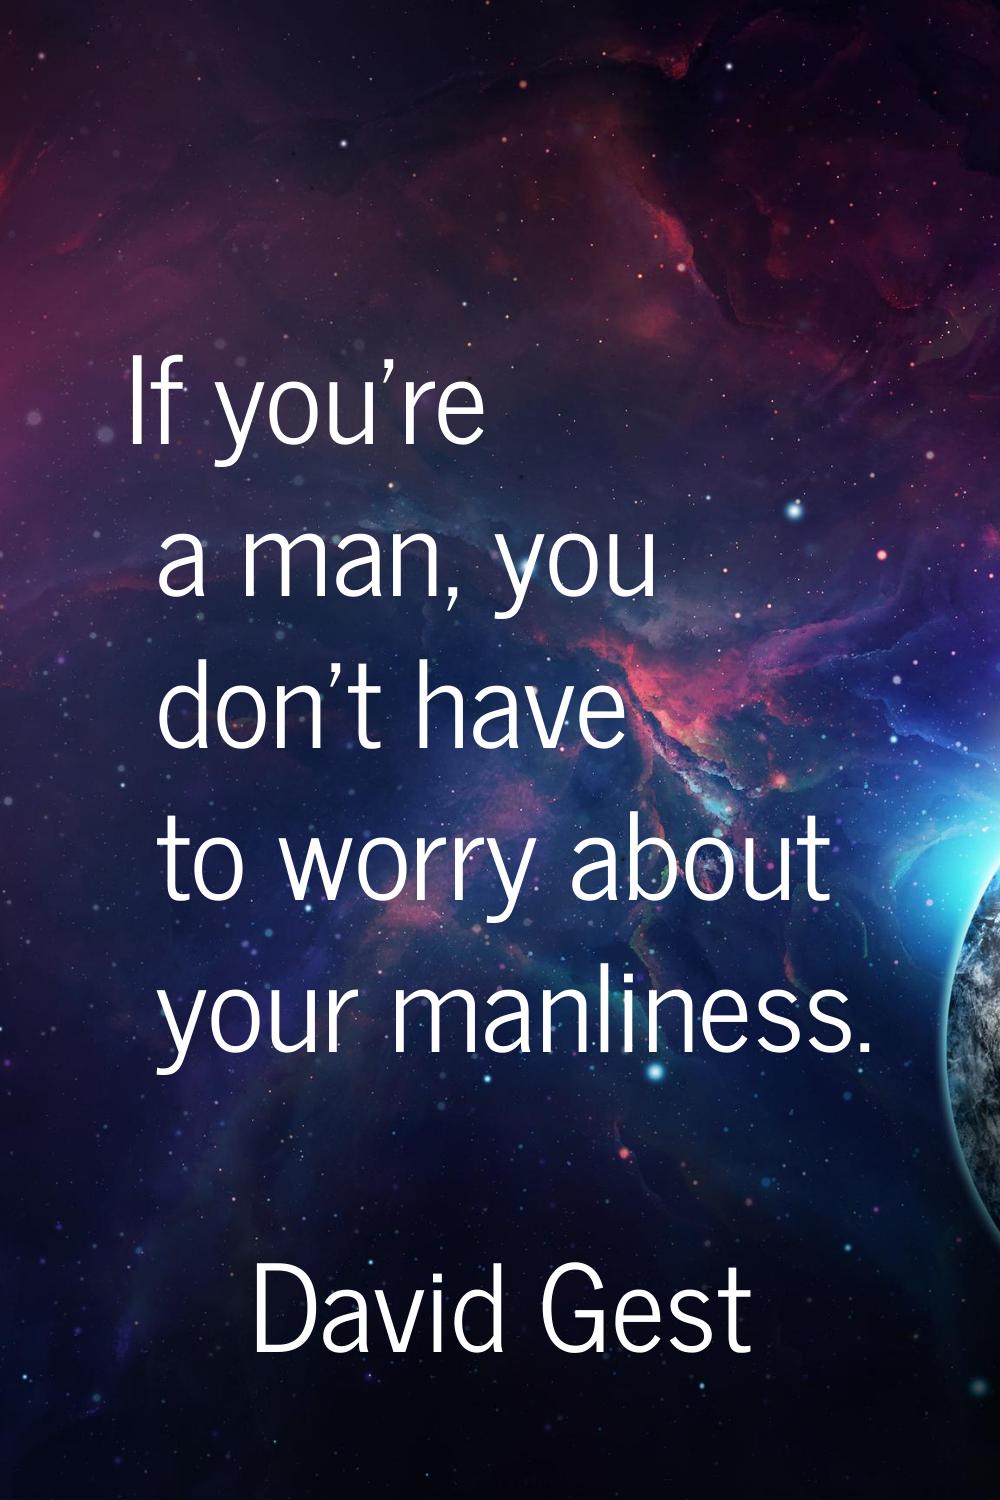 If you're a man, you don't have to worry about your manliness.